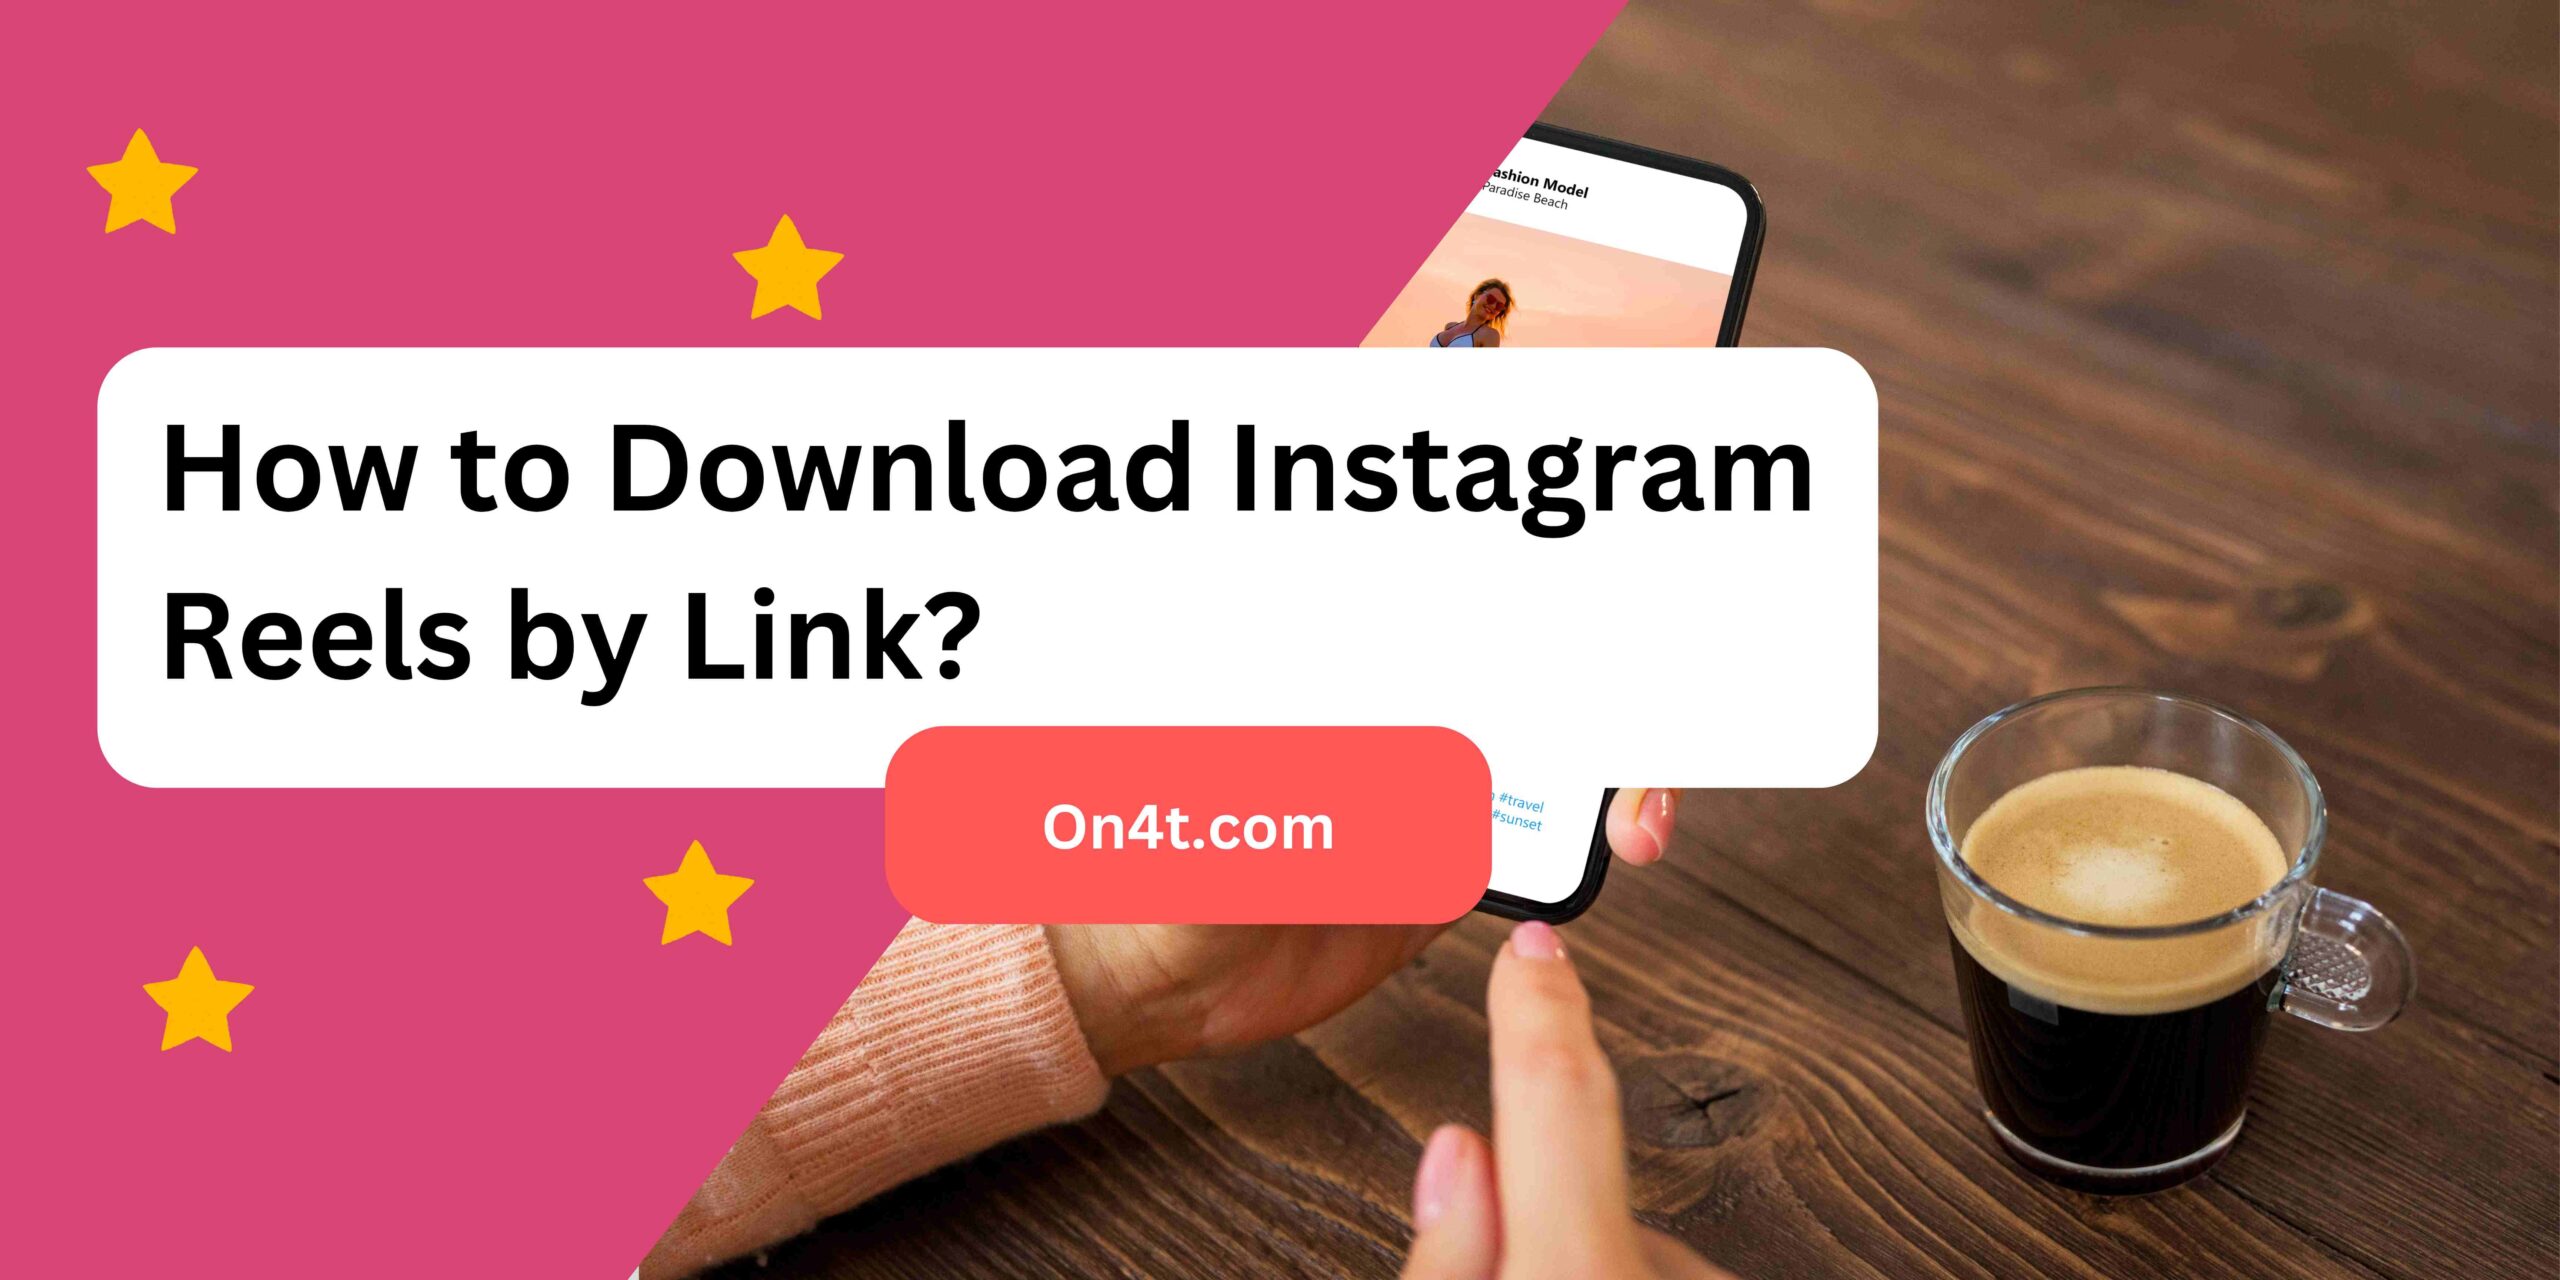 How to Download Instagram Reels by Link